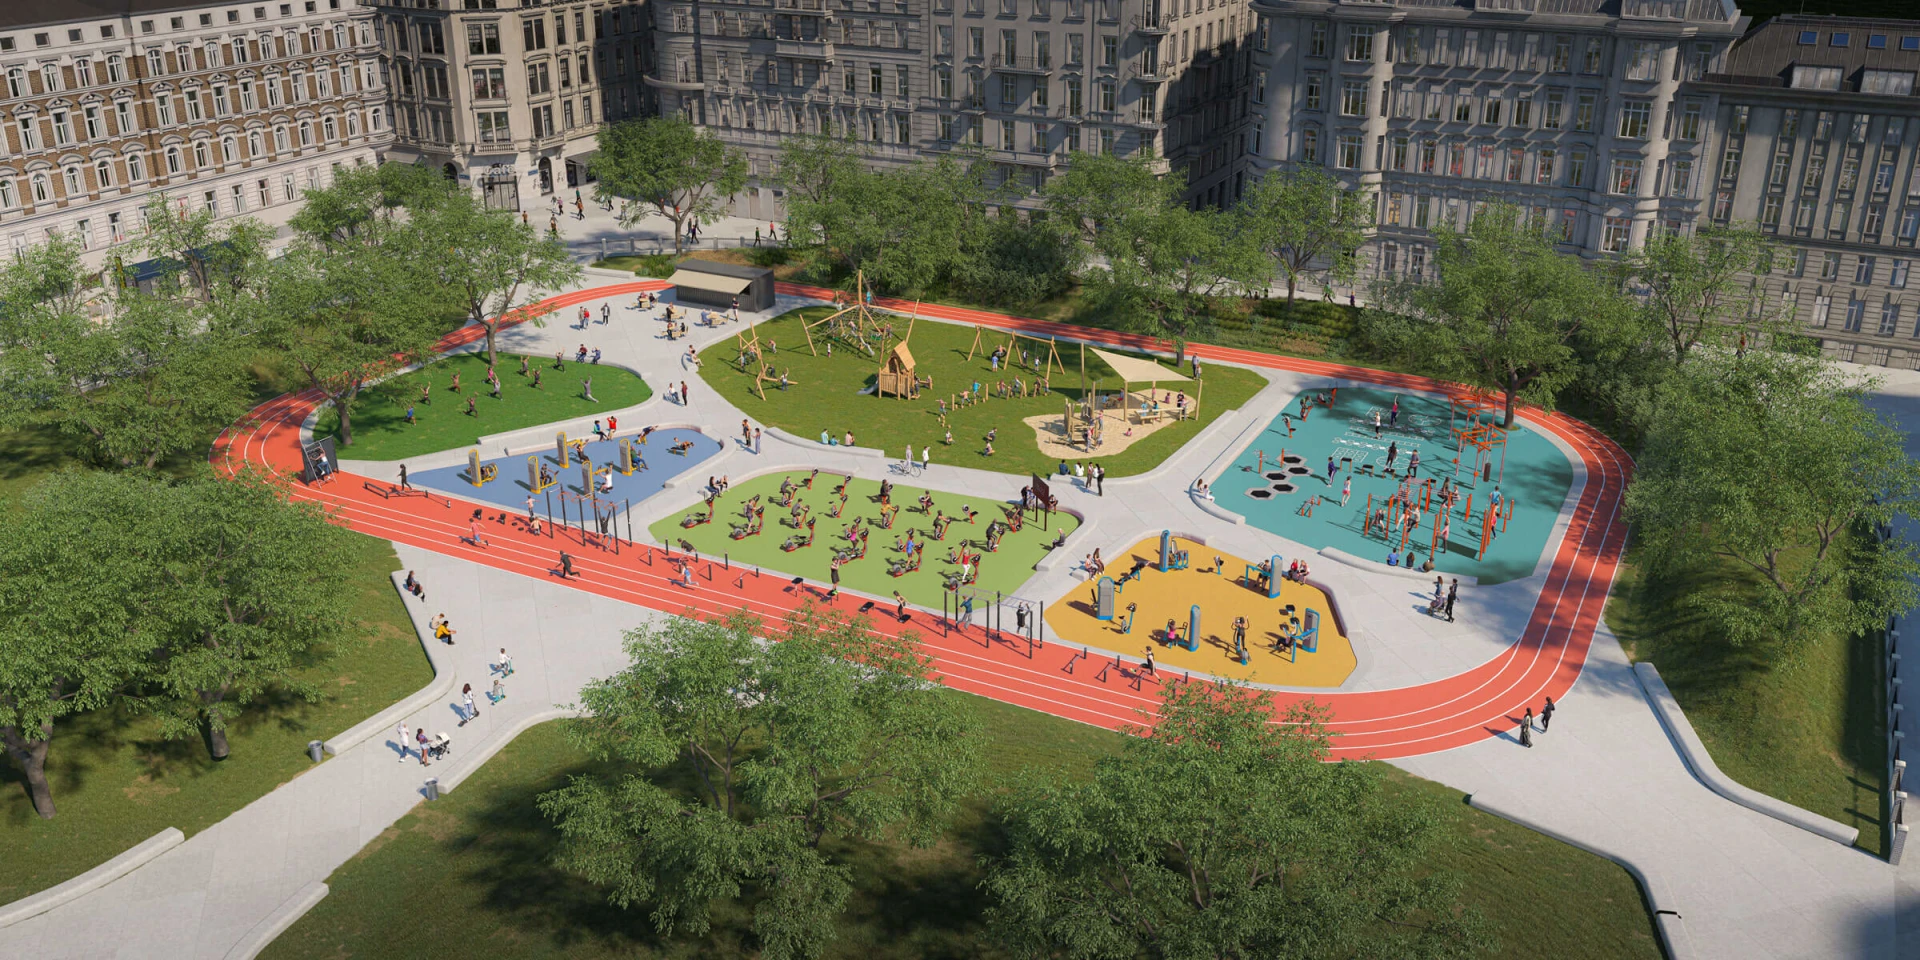 Design idea of an outdoor gym and playground destination area for communities